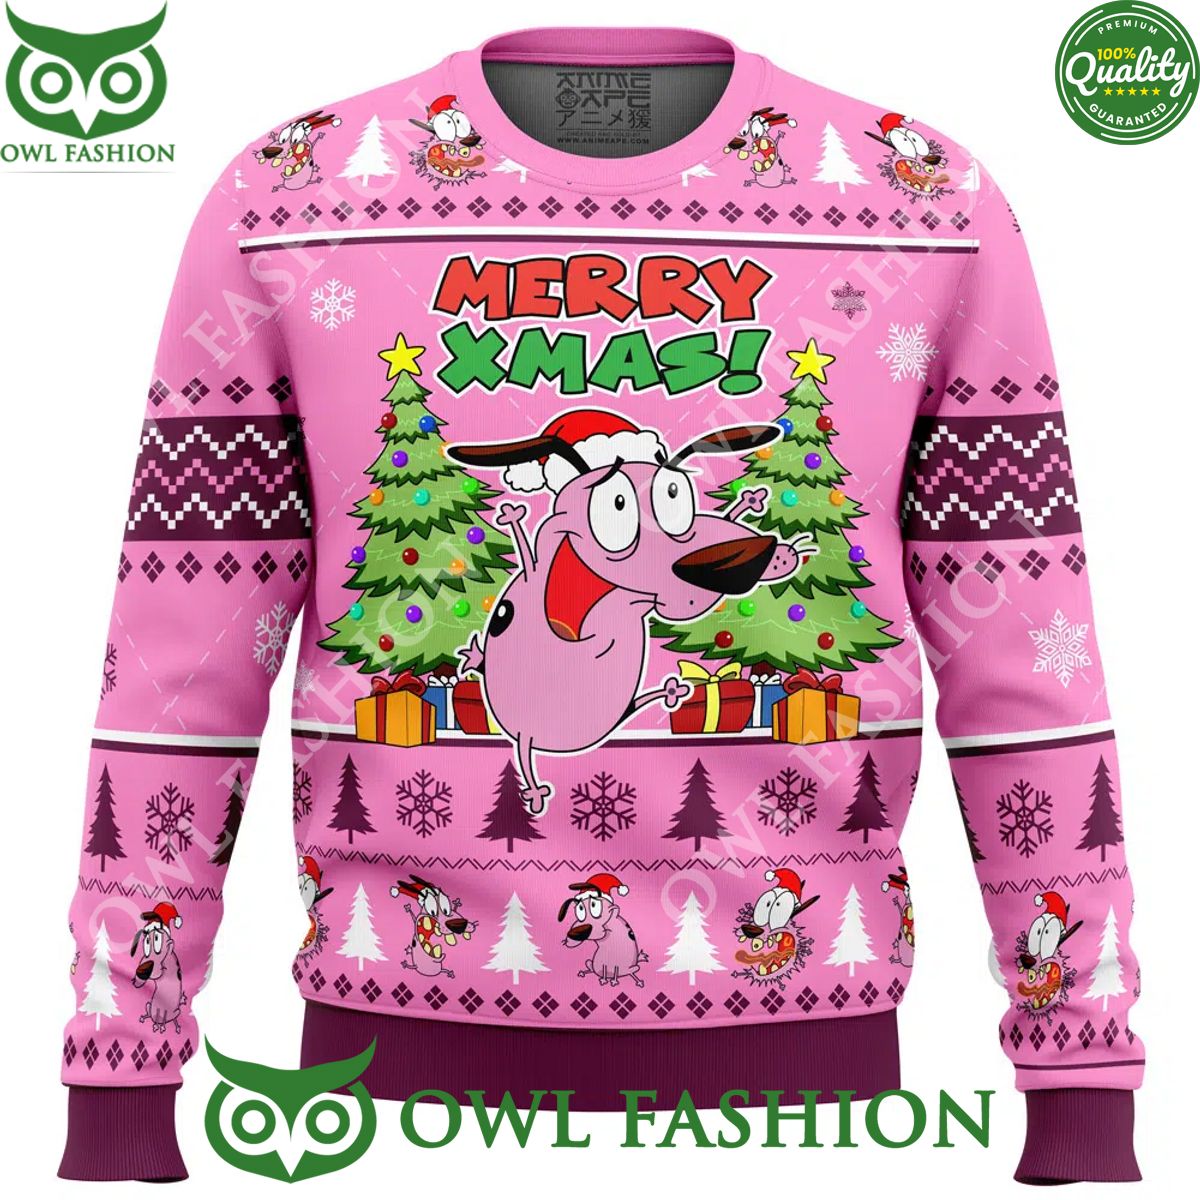 merry xmas courage the cowardly dog ugly christmas sweater jumper 1 9tTuD.jpg